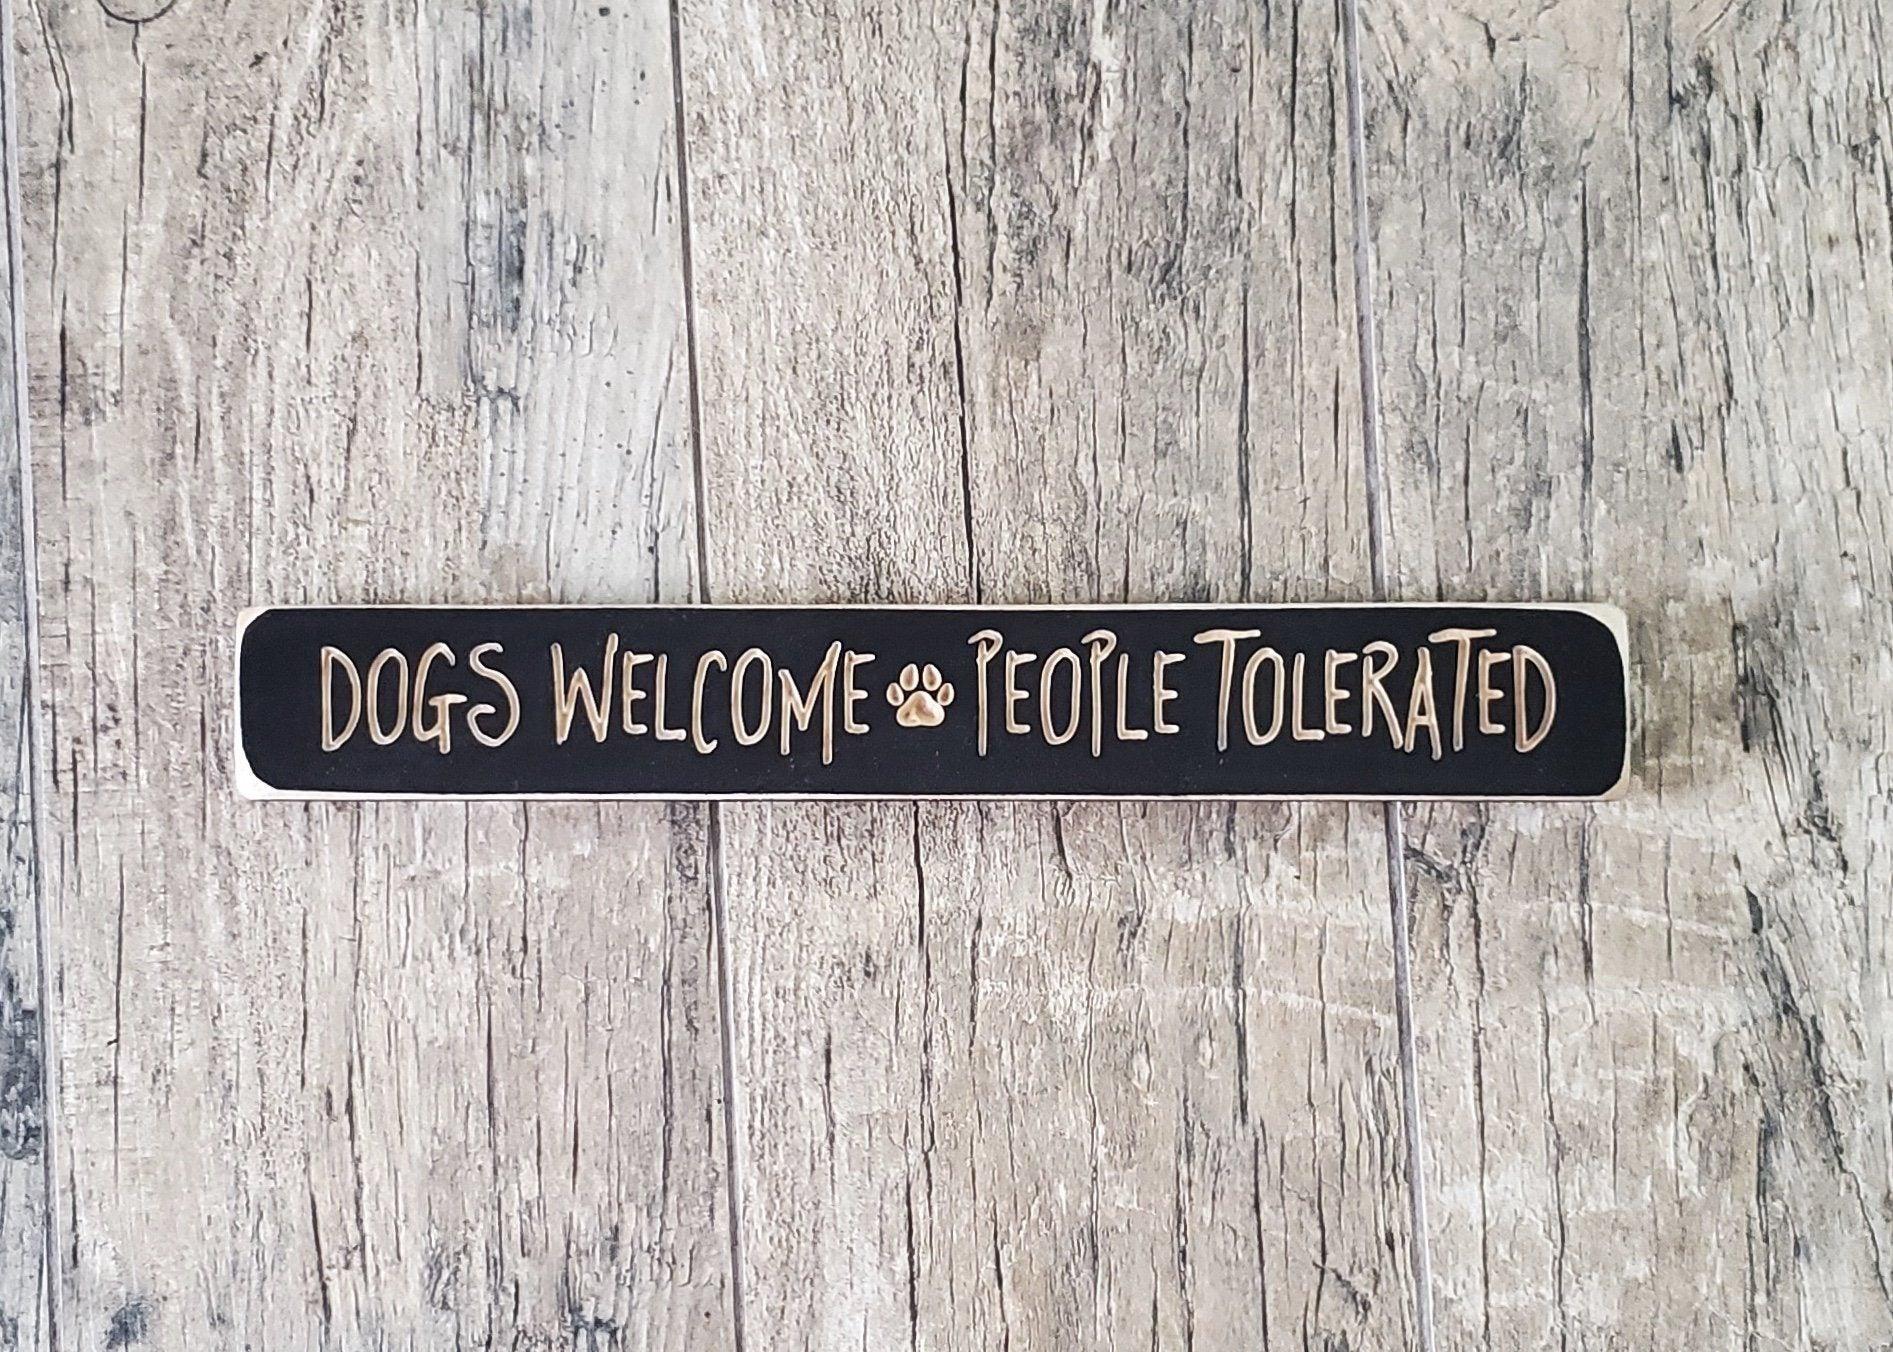 Dogs Welcome People Tolerated Wood Sign - A Rustic Feeling